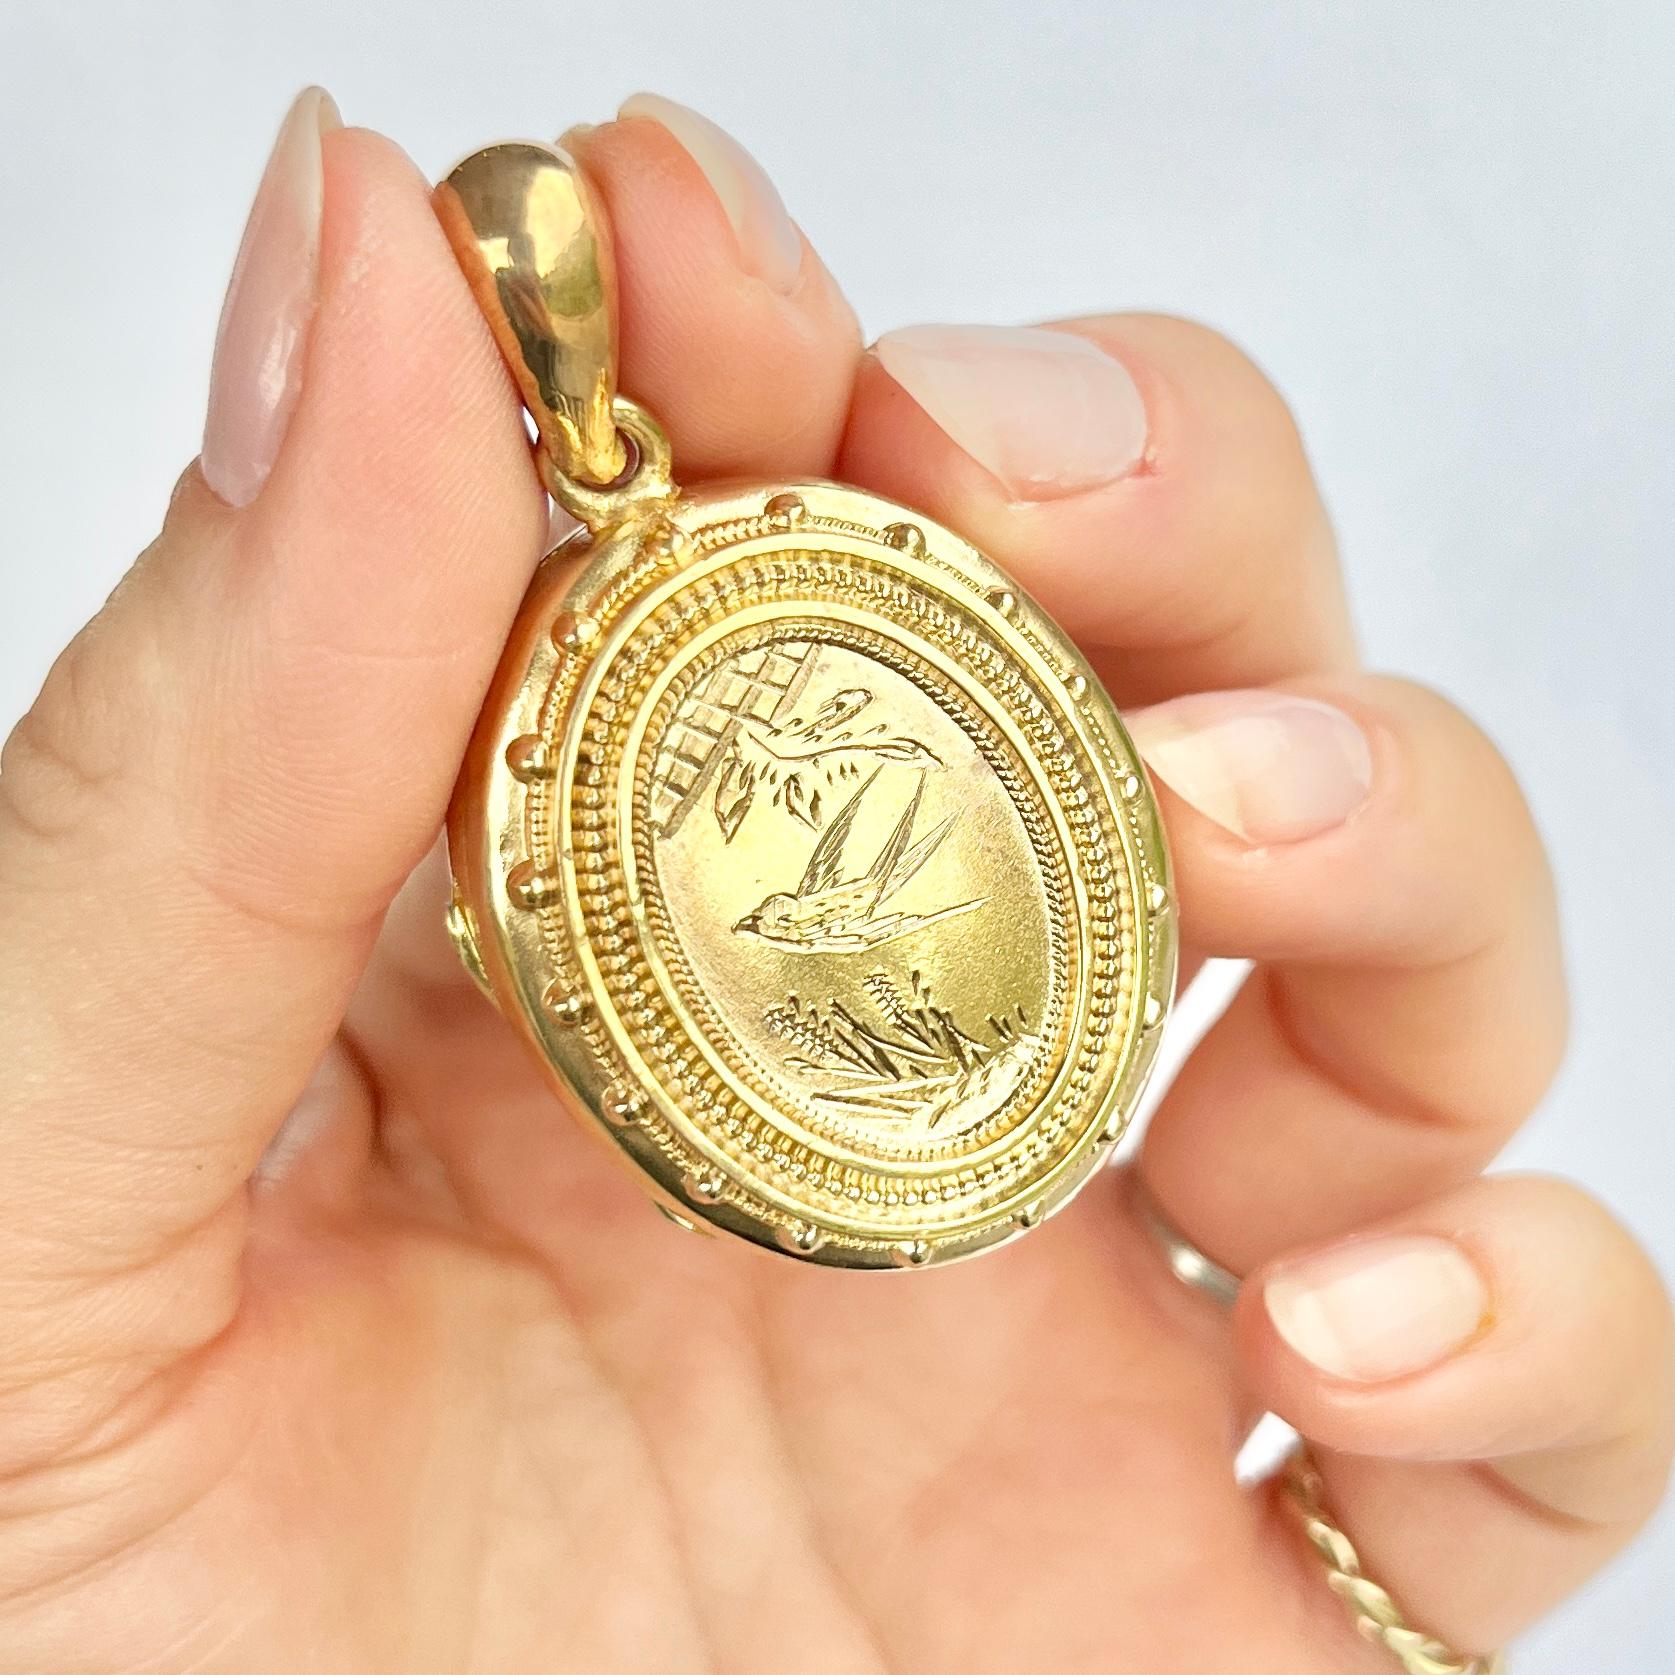 This locket is gold gilt and has beautiful detail on it. The inside of the locket still has the original panes of glass. 

Locket Dimensions 36x28mm

Weight: 17g